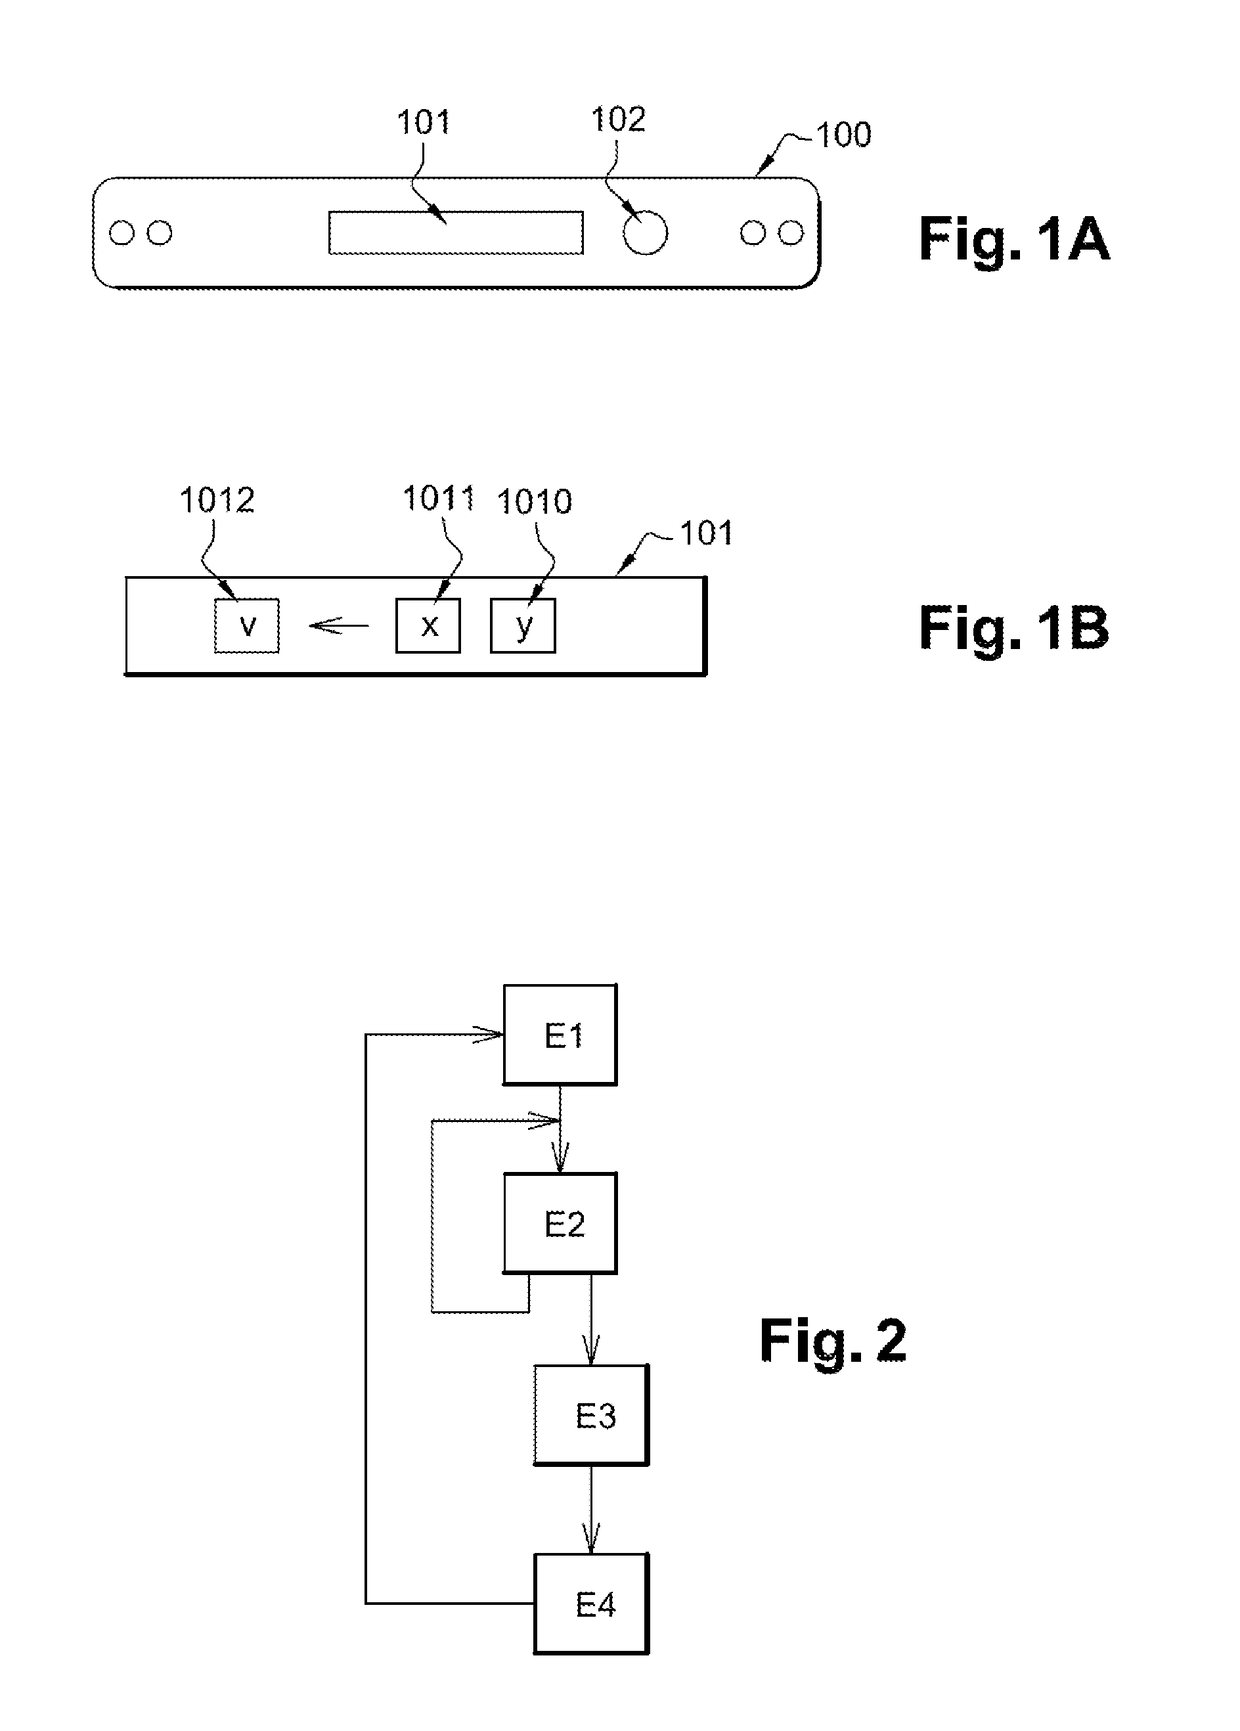 Method for inputting at least one alphanumeric character by using a user interface of an electronic device